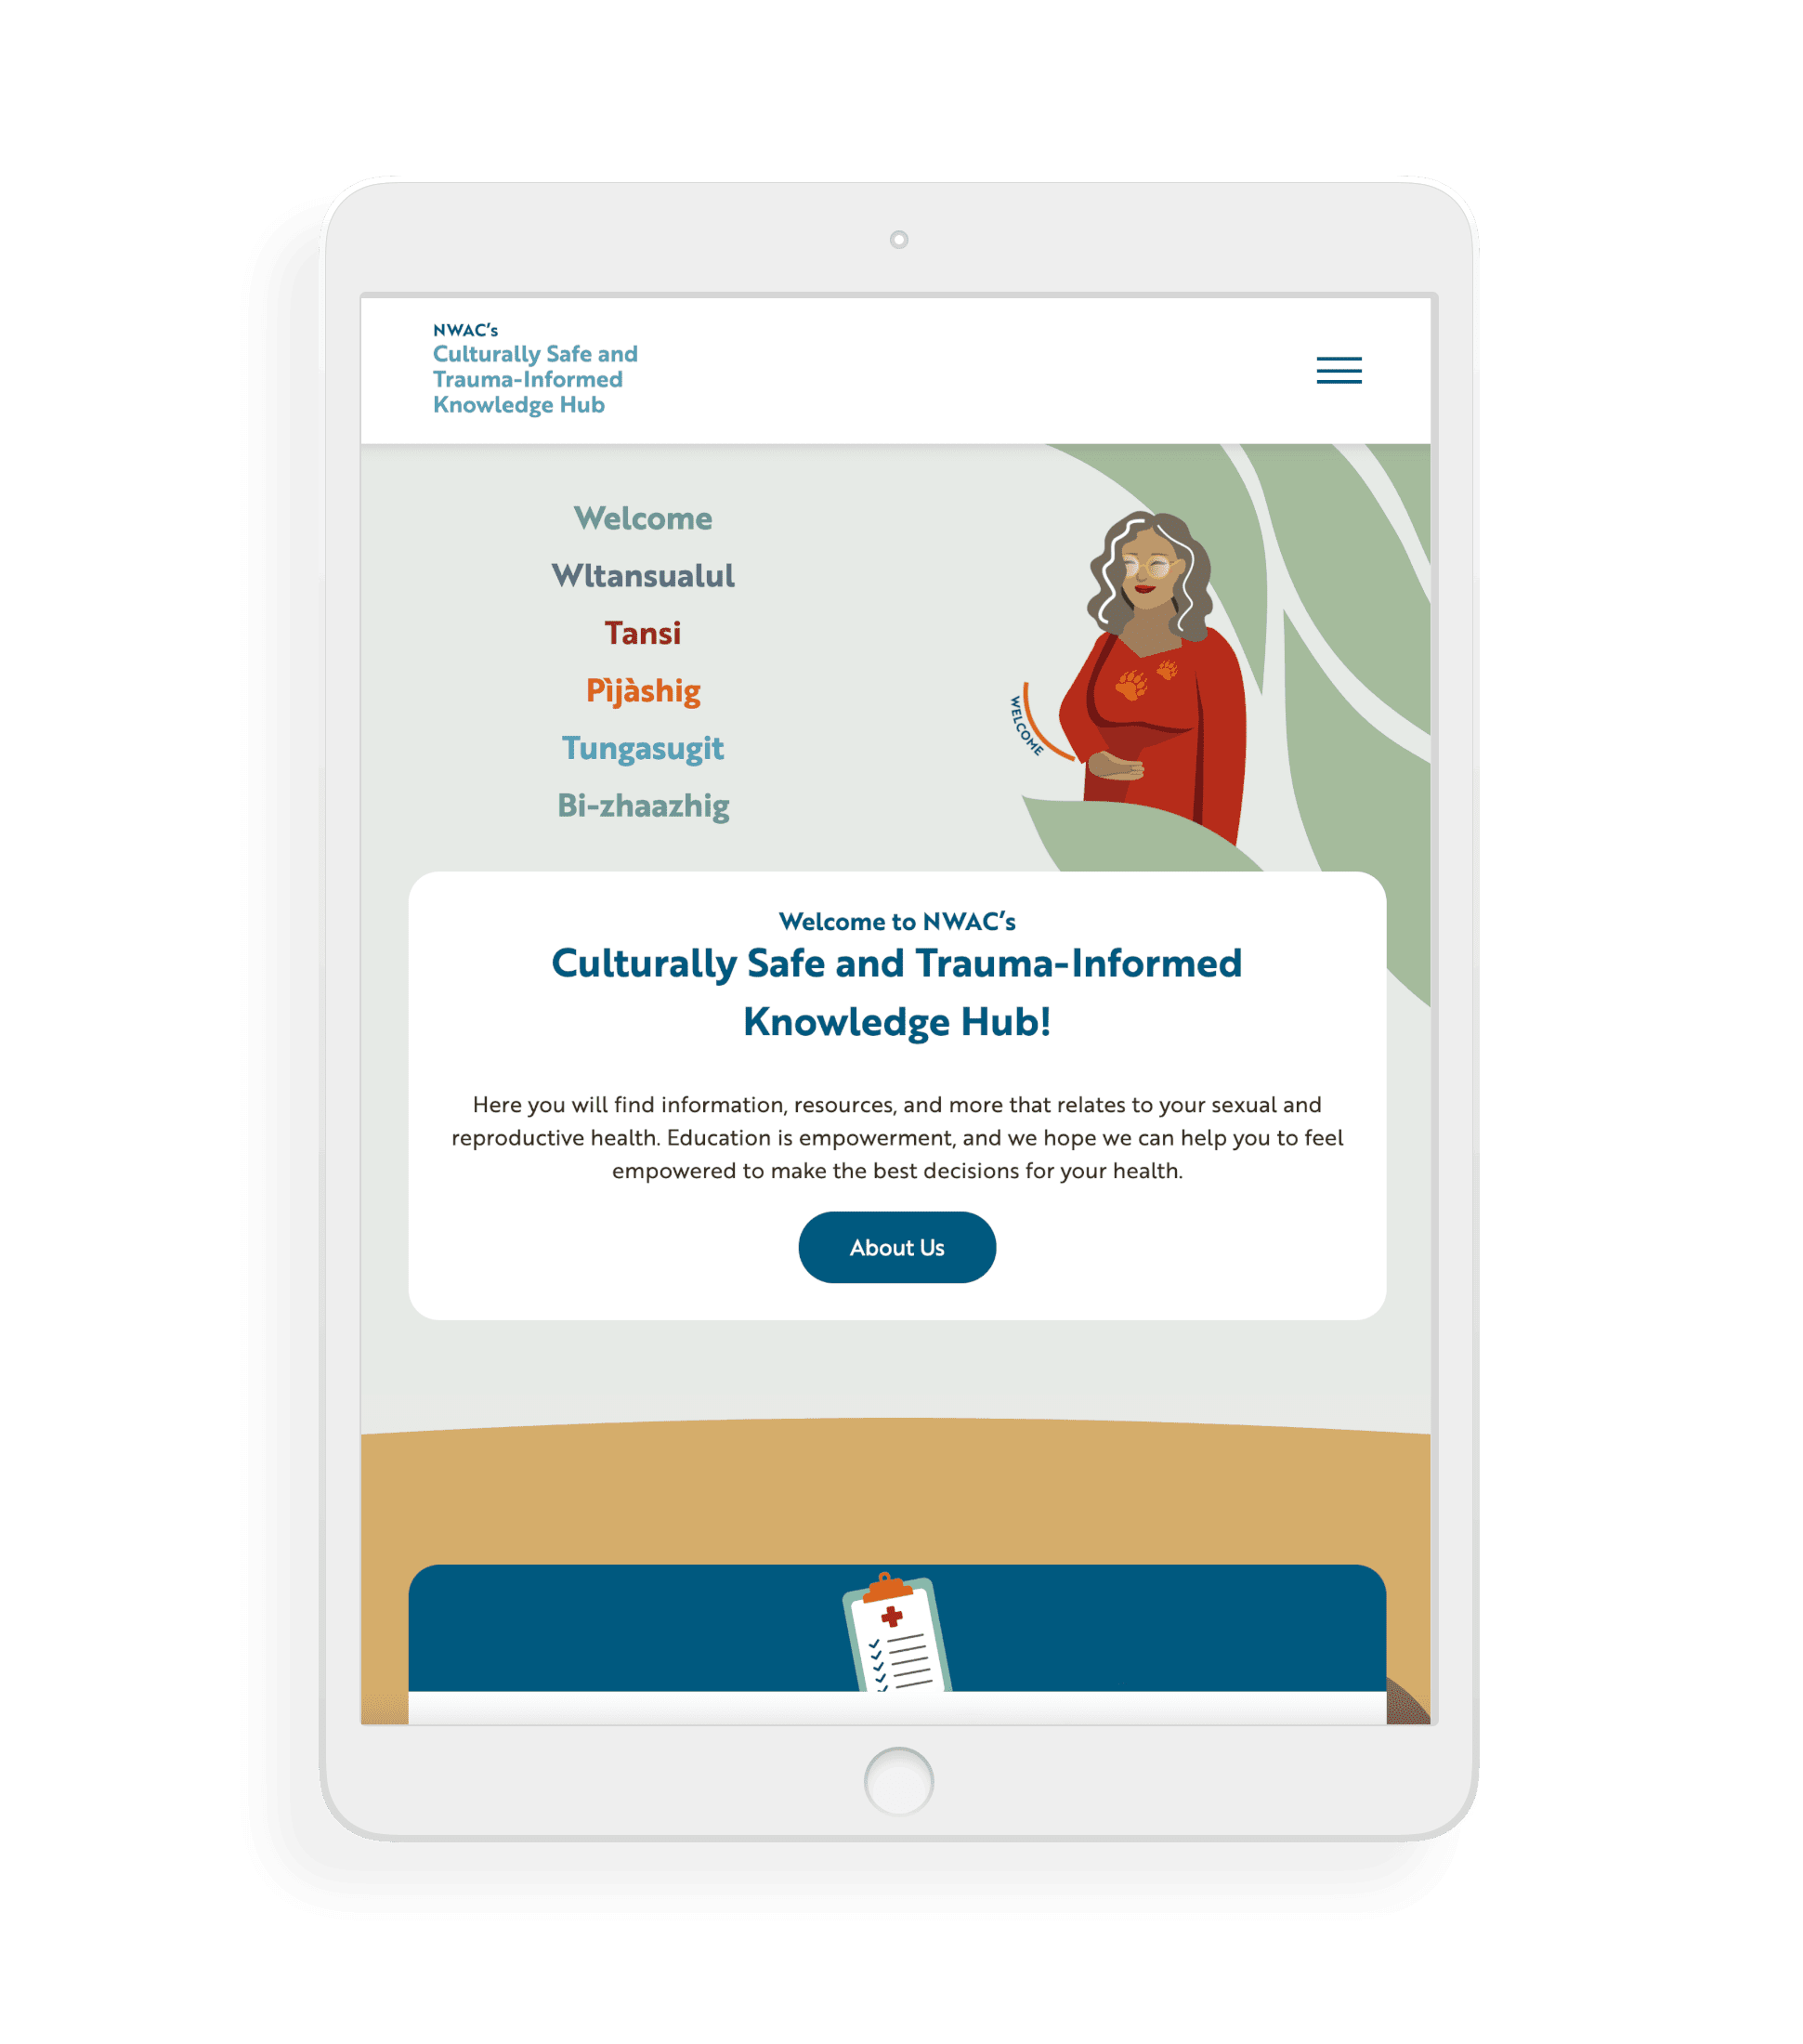 An ipad mockup of the main page for the NWAC Culturally Safe and Trauma Informed Knowledge Hub. The page features "welcome" in several different native languages and has a small blurb welcoming you to the hub.